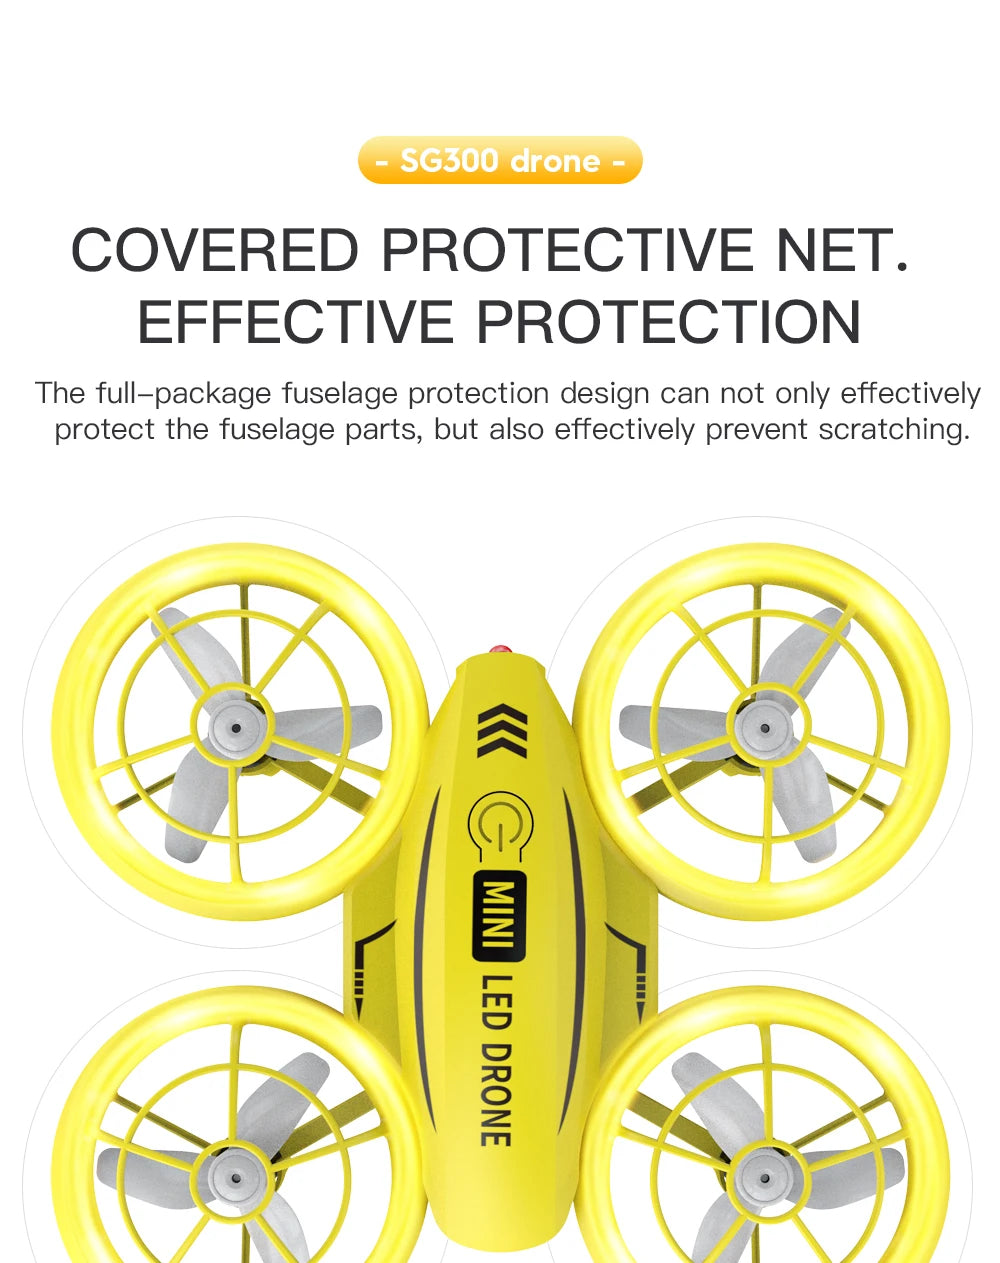 SG300/SG300S Mini Drone, full-package fuselage protection design can not only effectively protect the